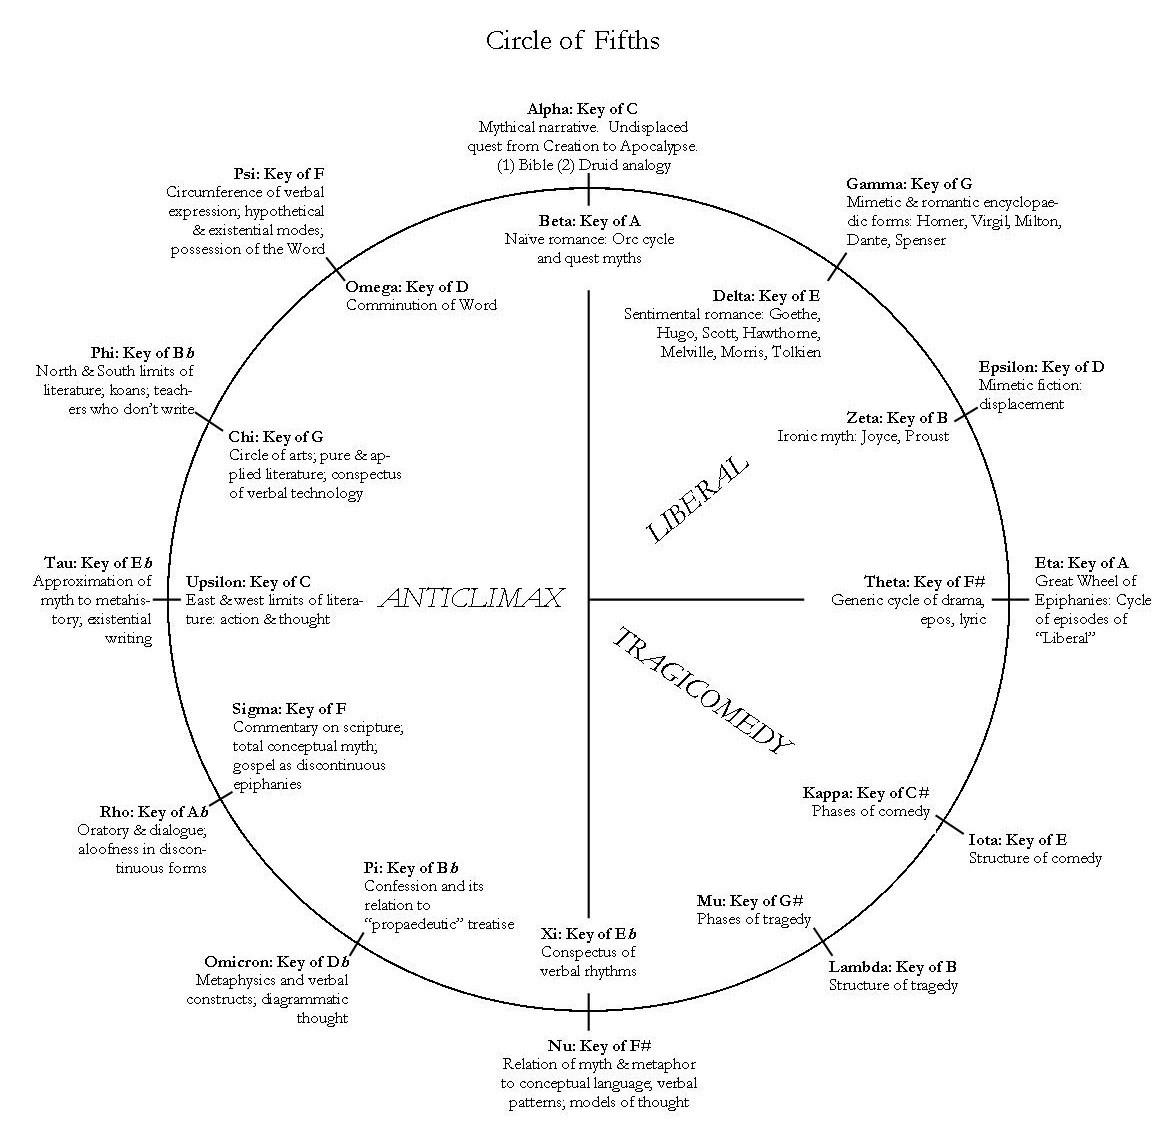 AC.circle of fifths